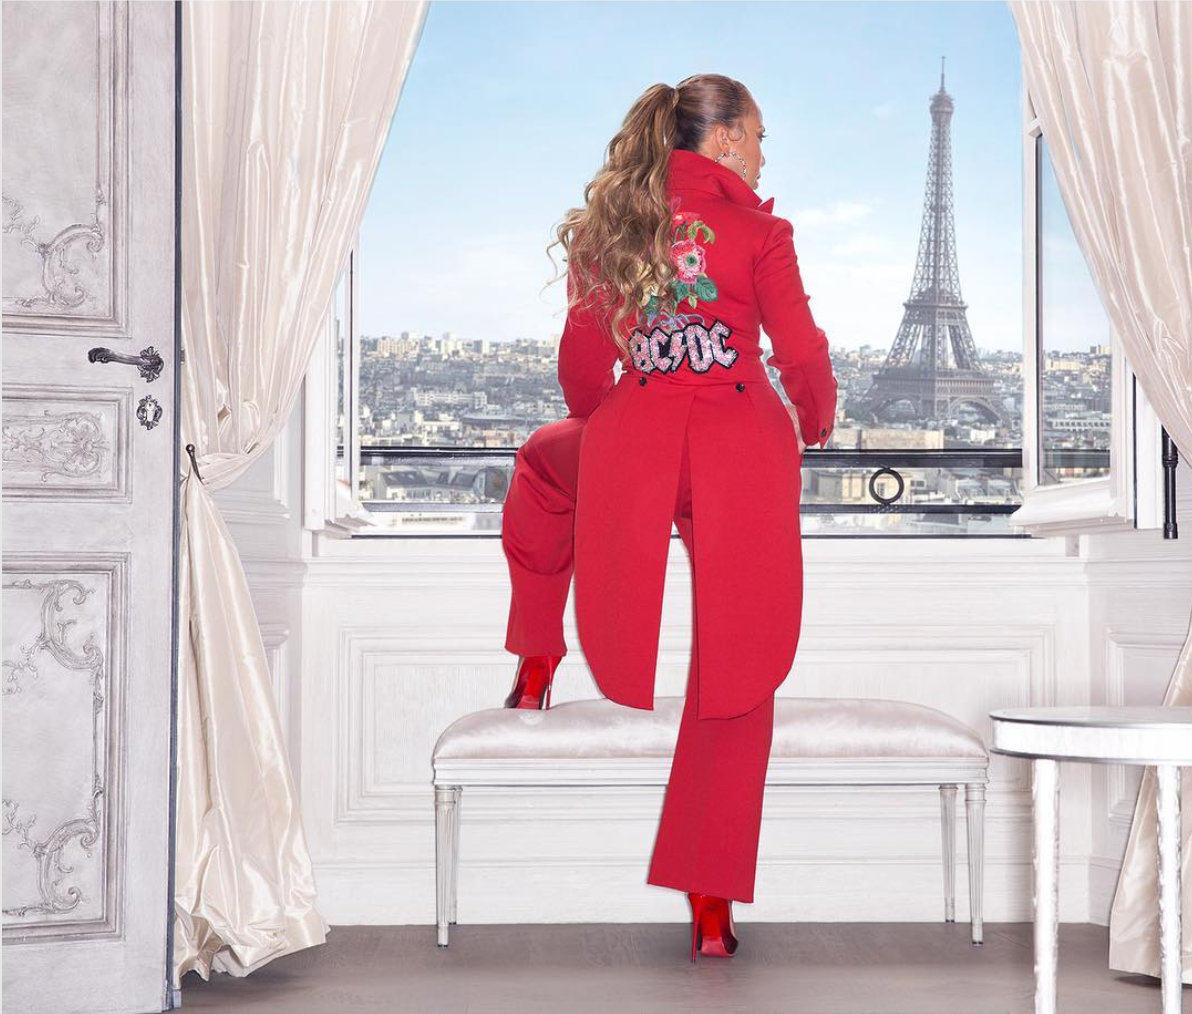 16 Times Marjorie Harvey Slayed The Travel Game